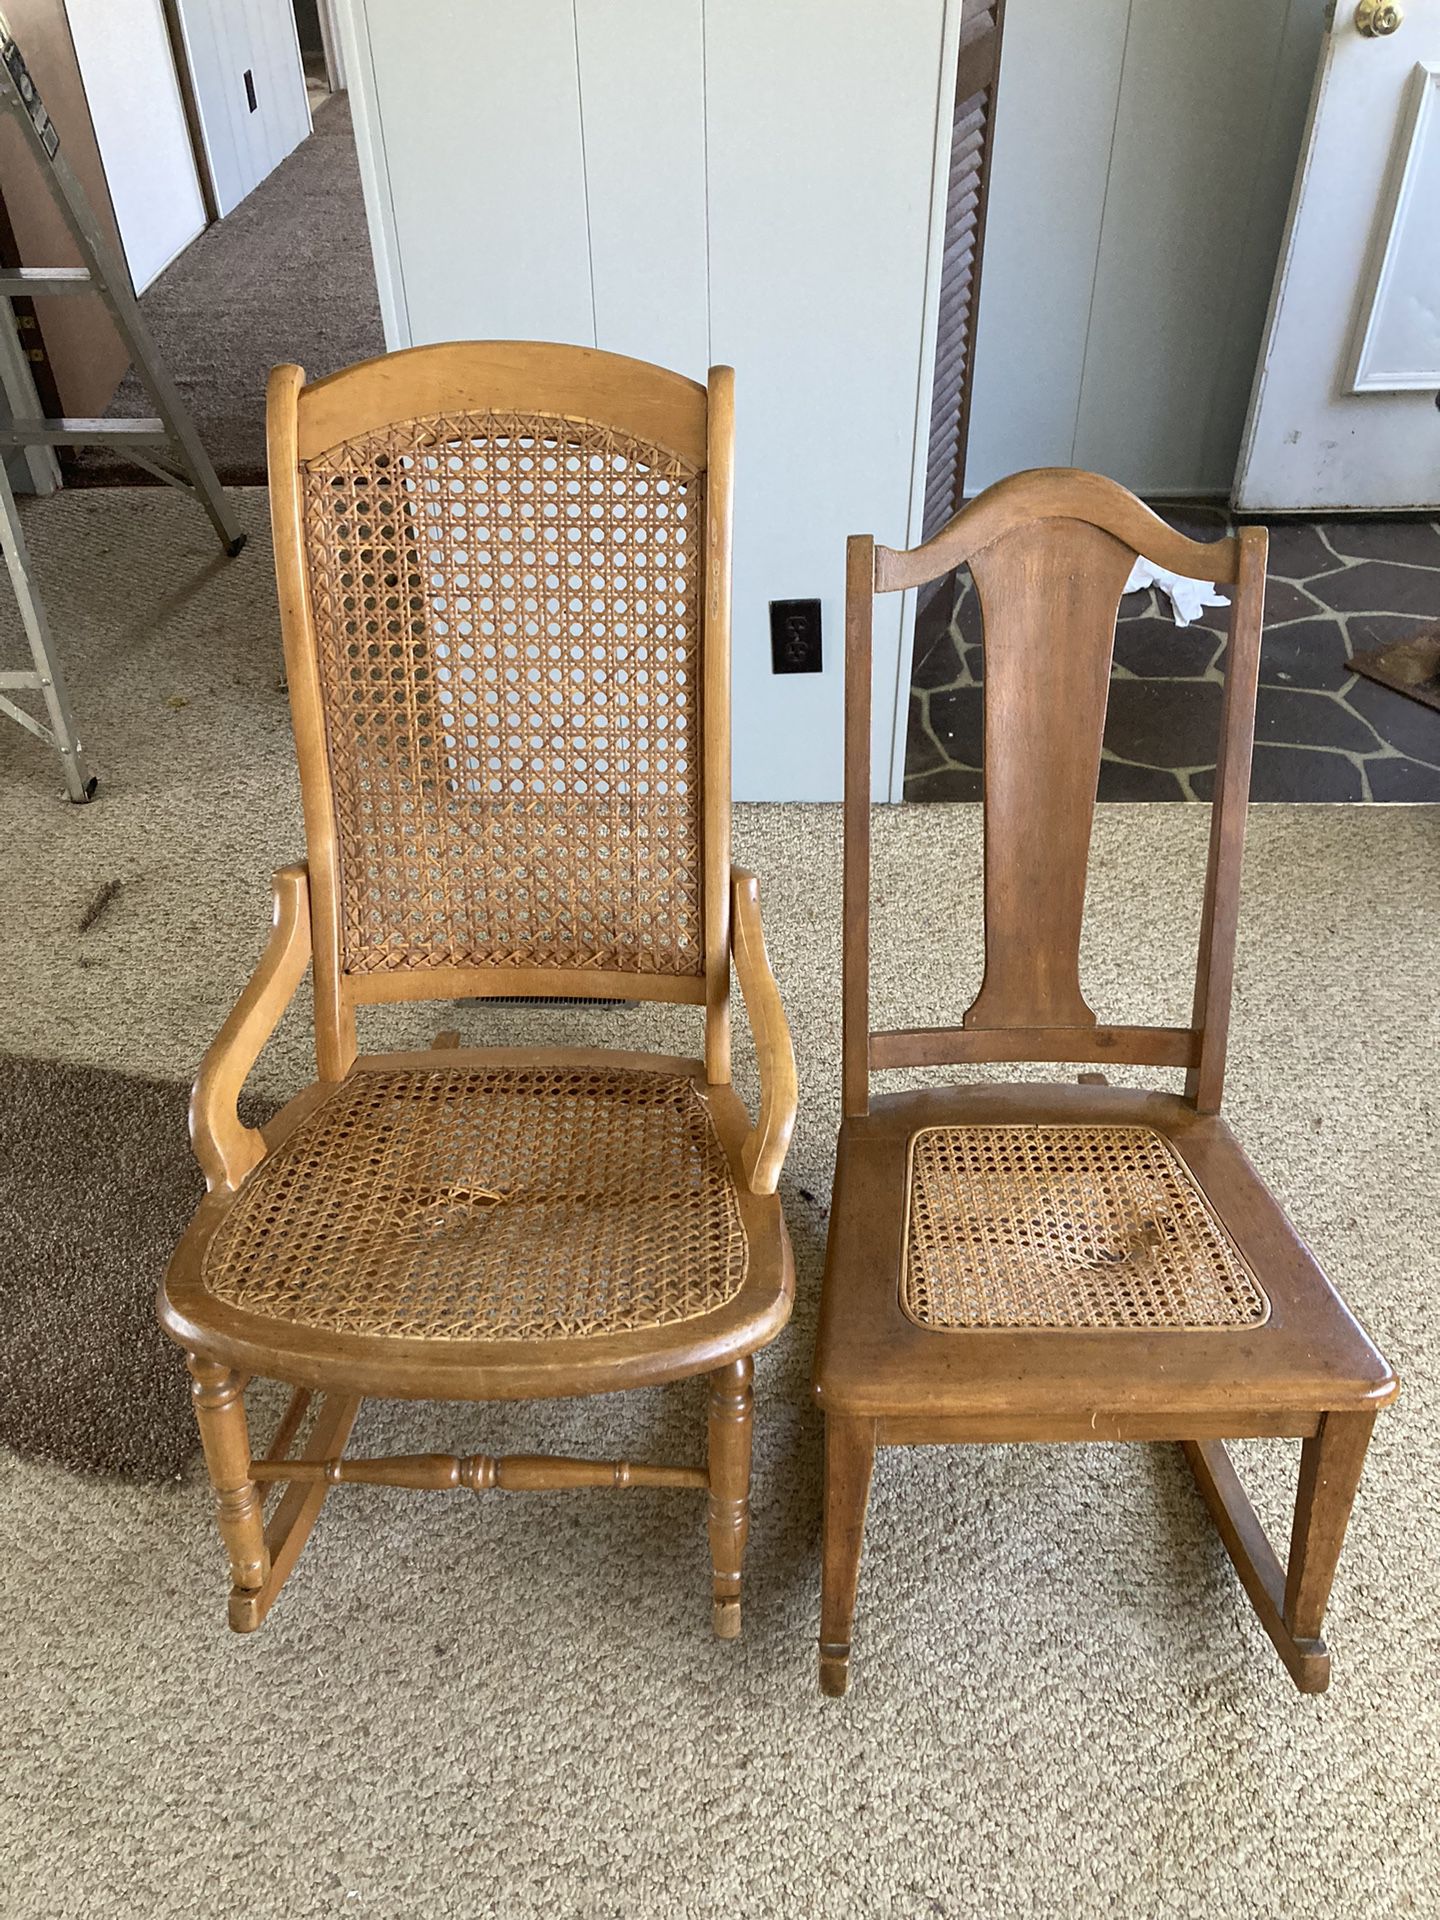 Two Rocking Chairs.